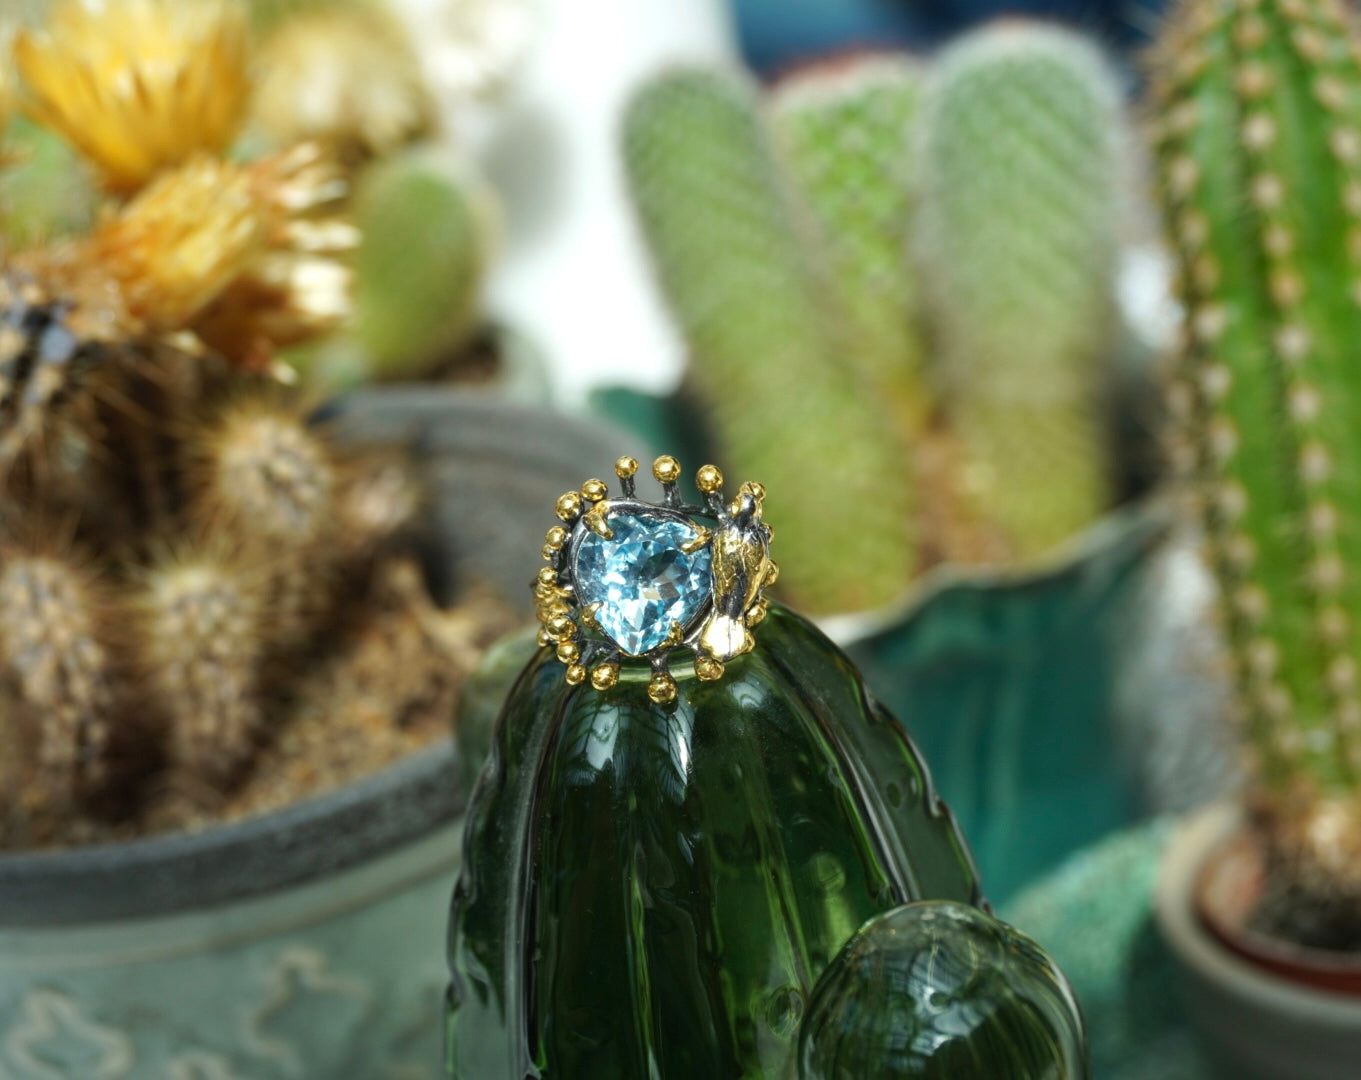 Glamorous Silver Gold-Plated Ring with Aquamarine and Bird Detail